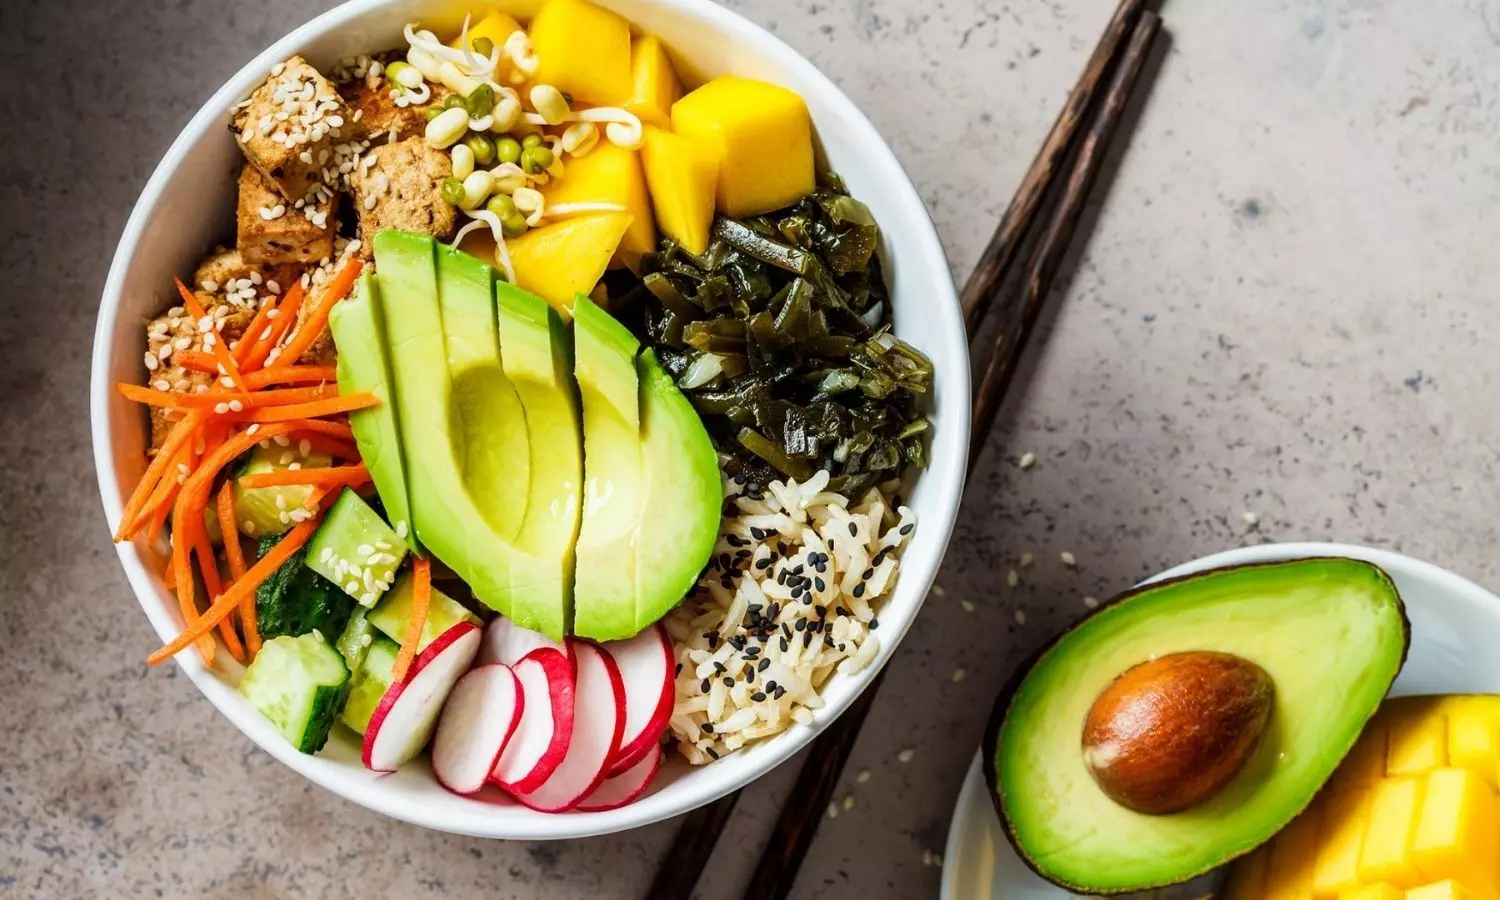 High-quality plant-based diets may lower depression risk: BMJ Study